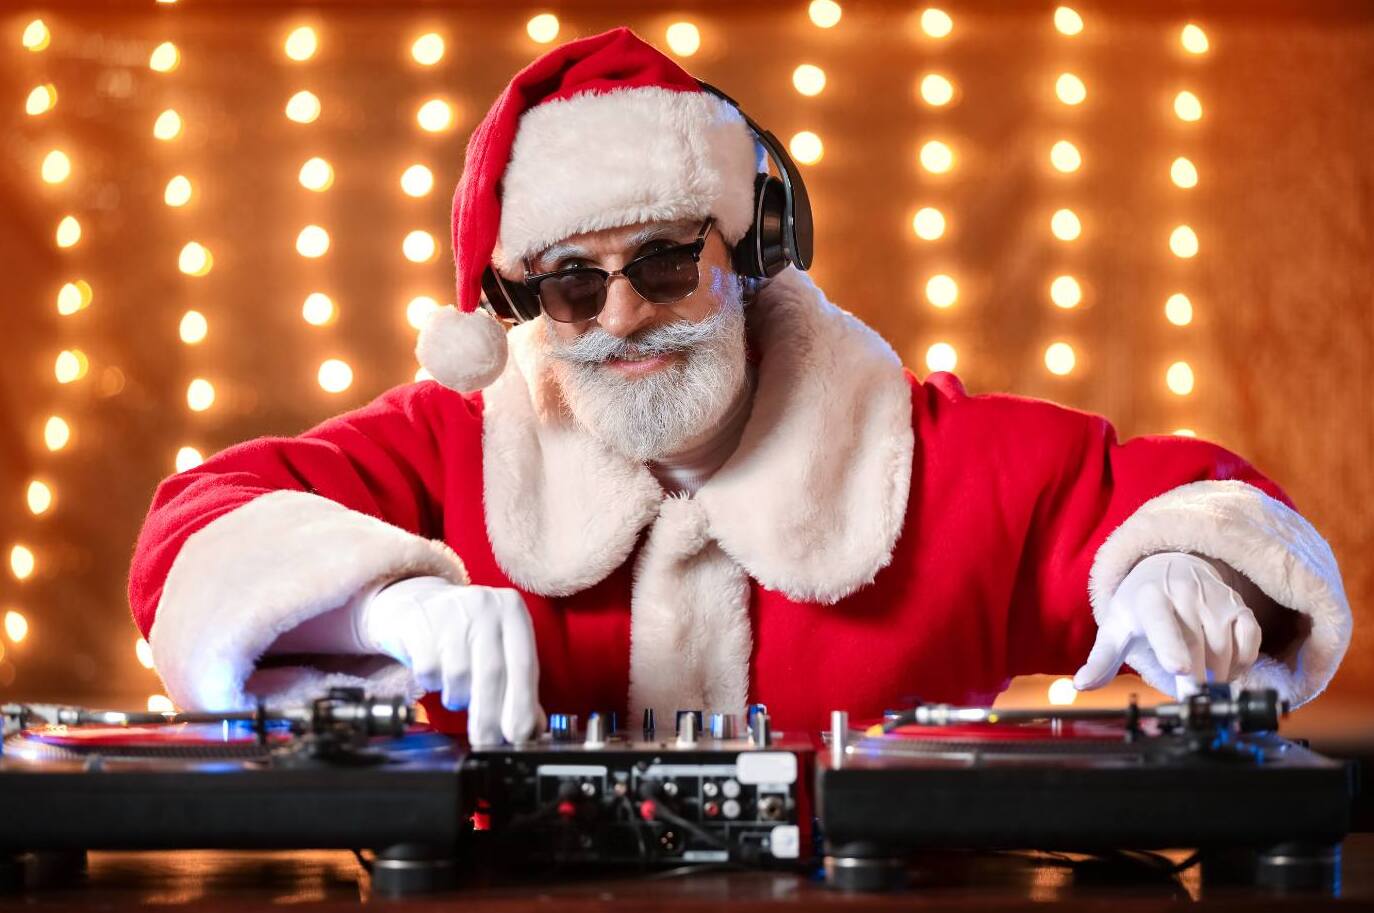 The Best Playlist for a Work Christmas Party